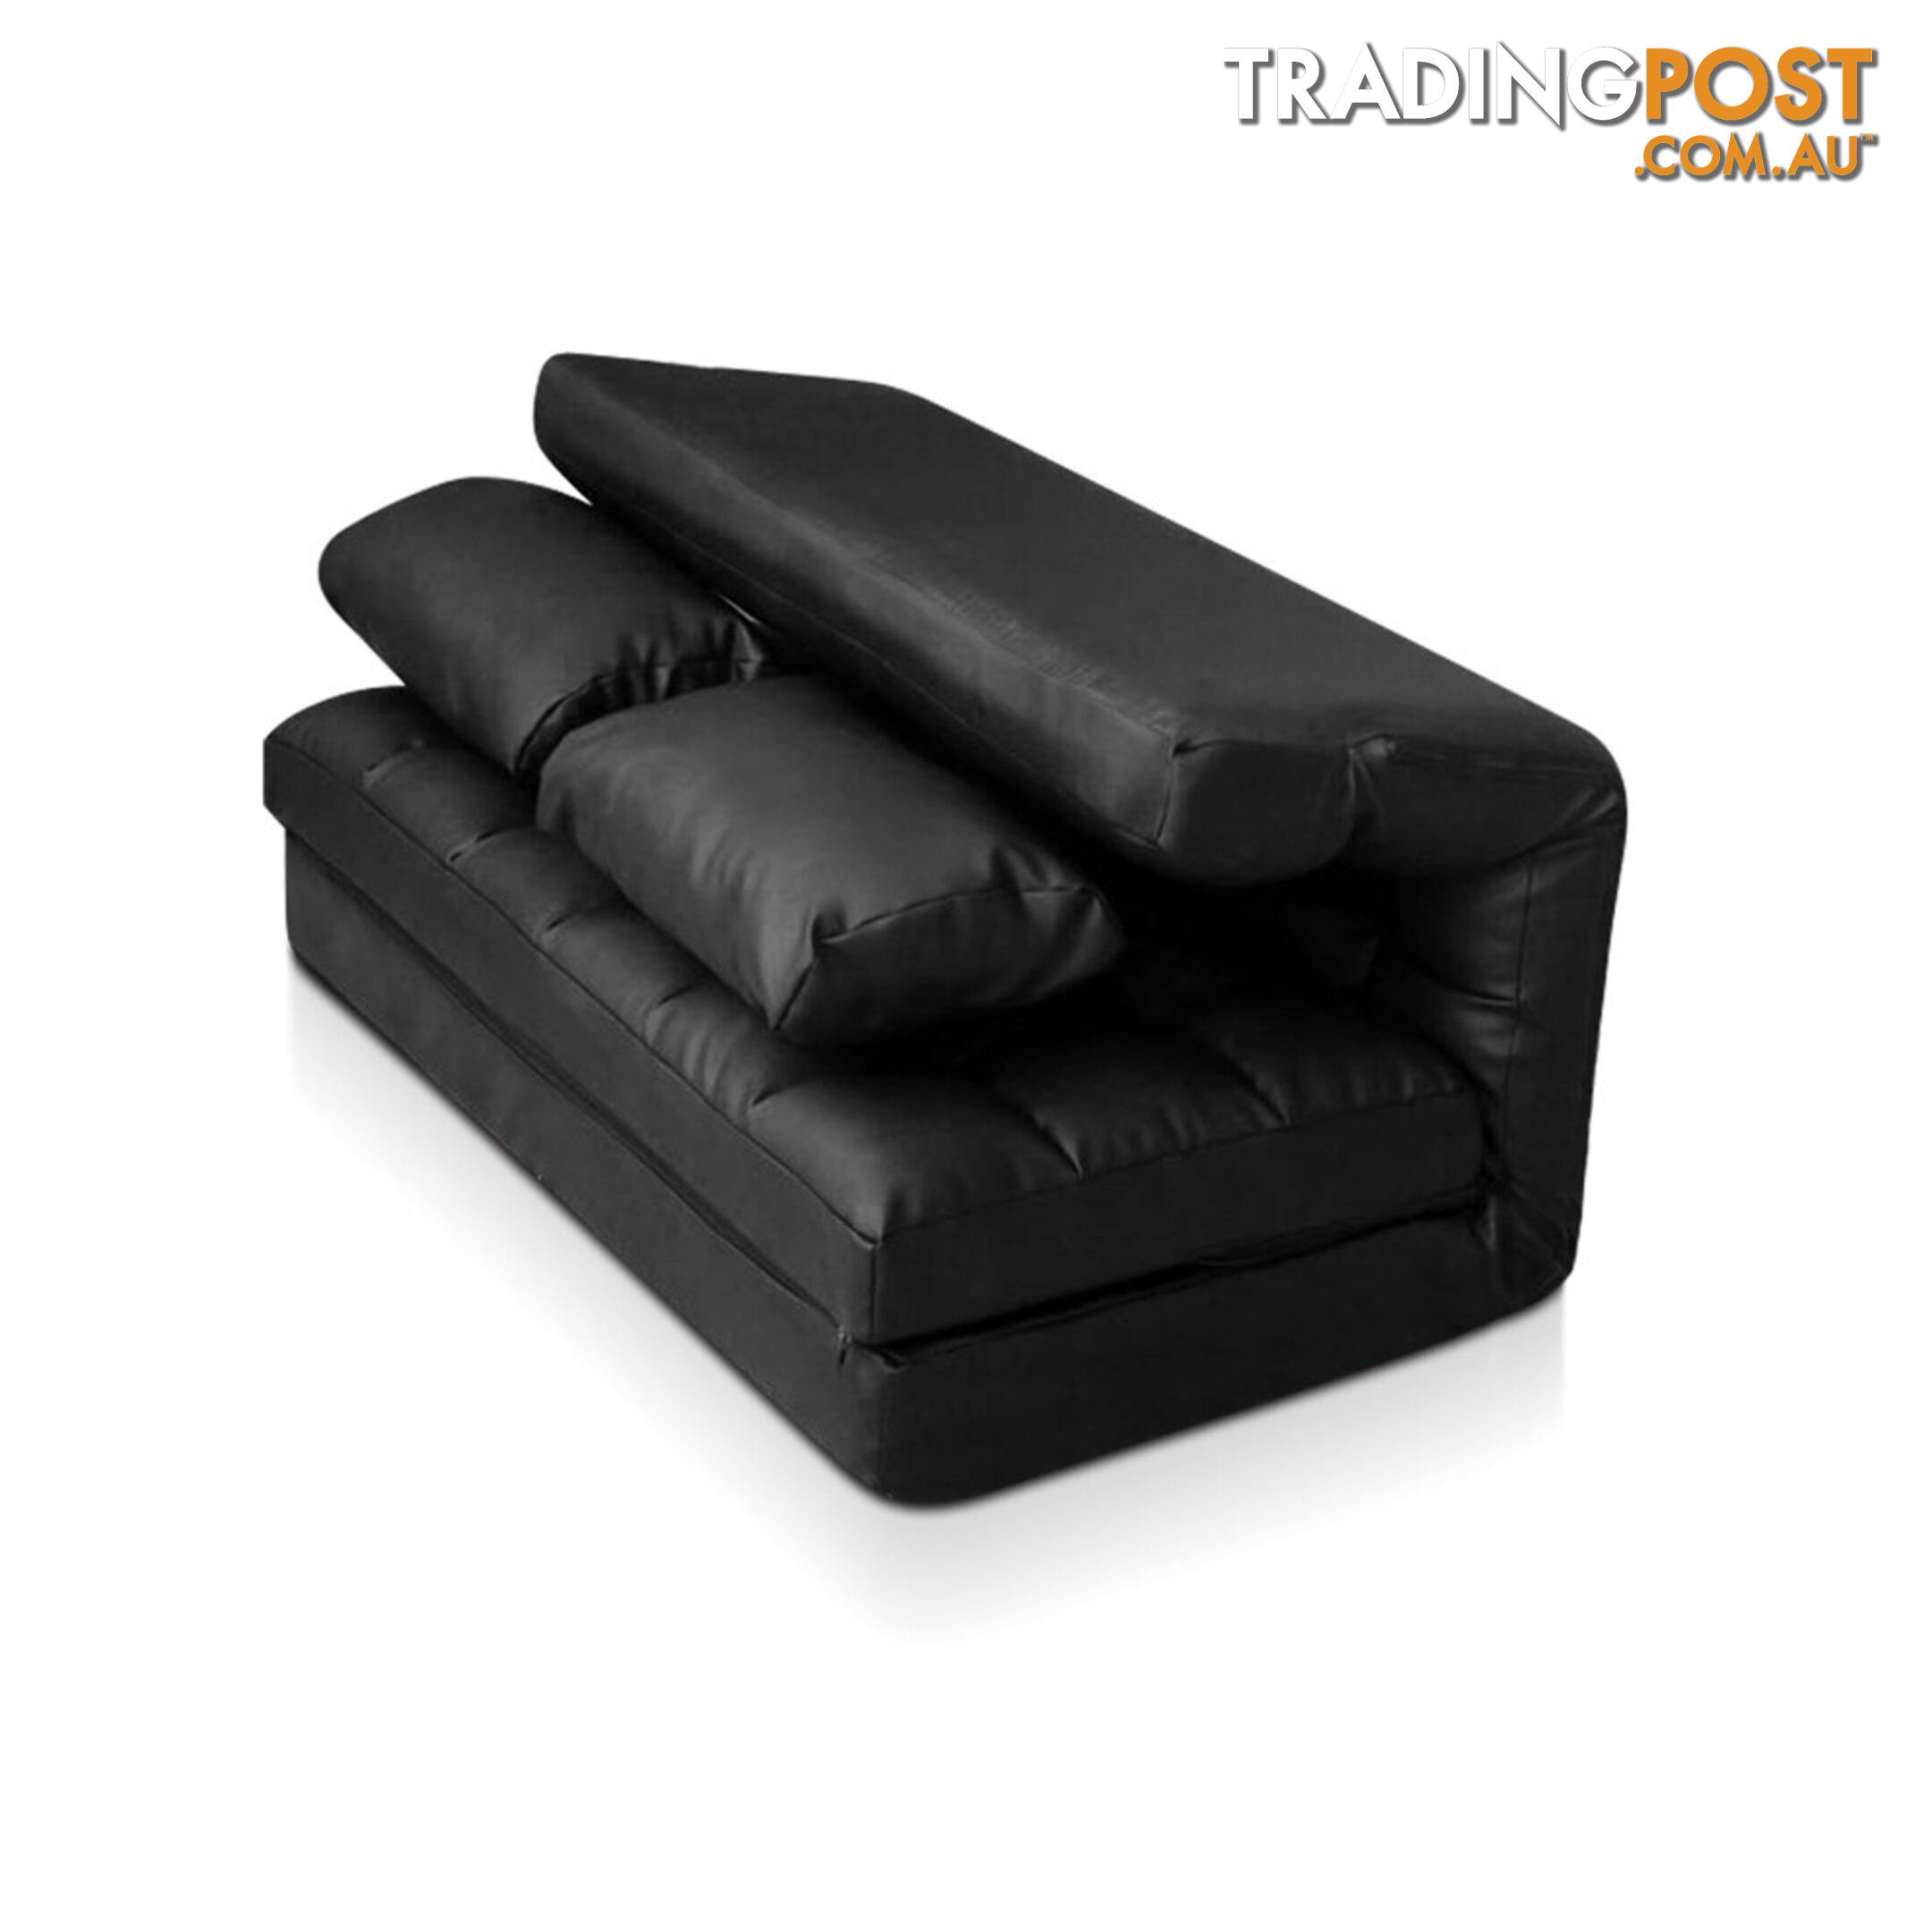 Double Size Adjustable Lounge Sofa - 10 positions PU Leather